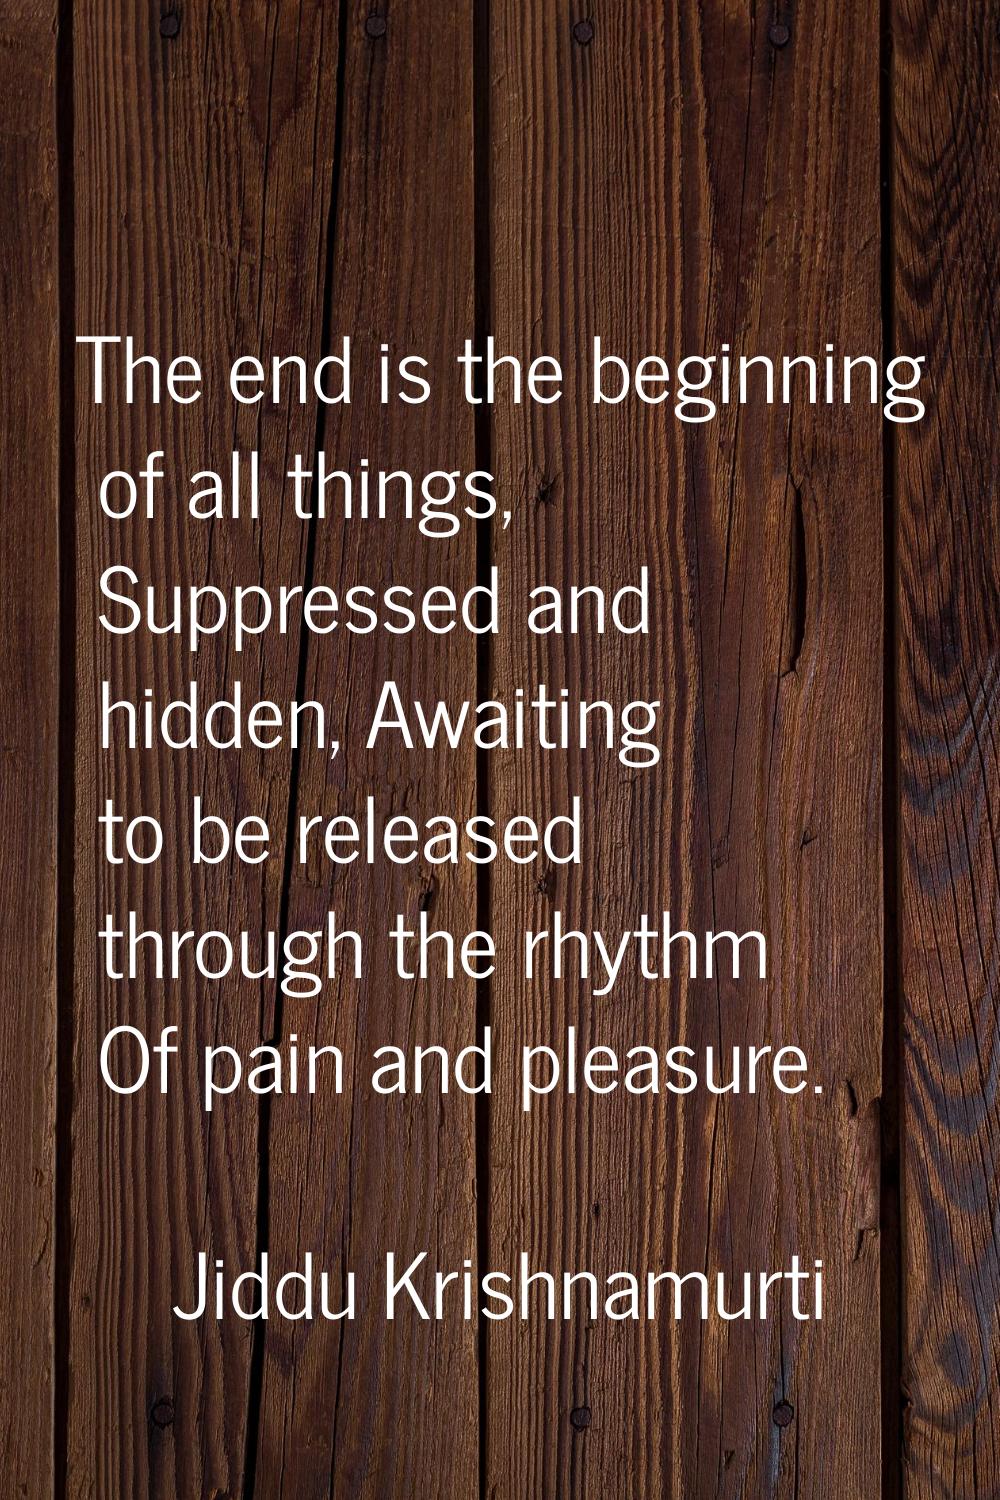 The end is the beginning of all things, Suppressed and hidden, Awaiting to be released through the 